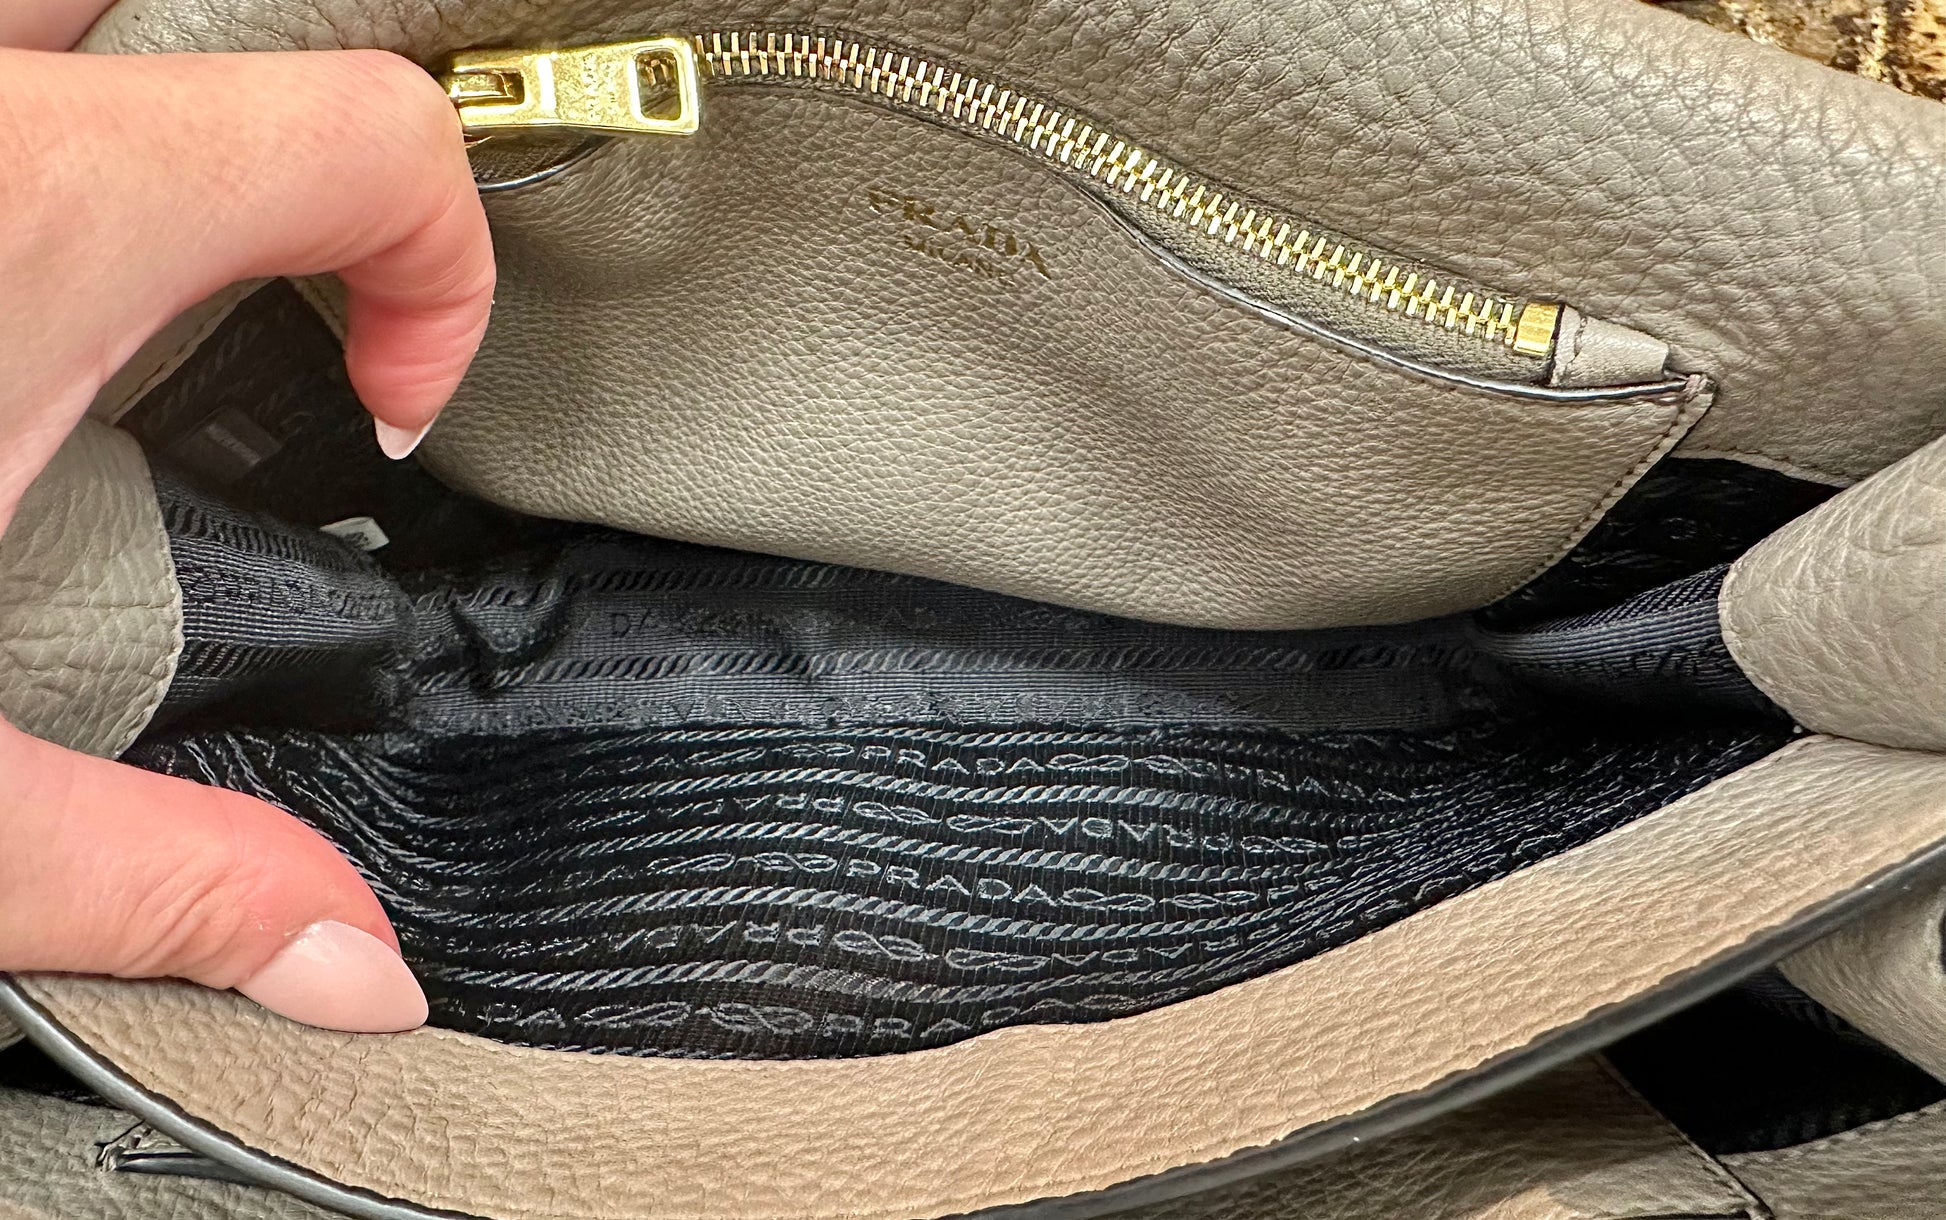 Interior of compartment with side zipper pocket and black prada logo lining